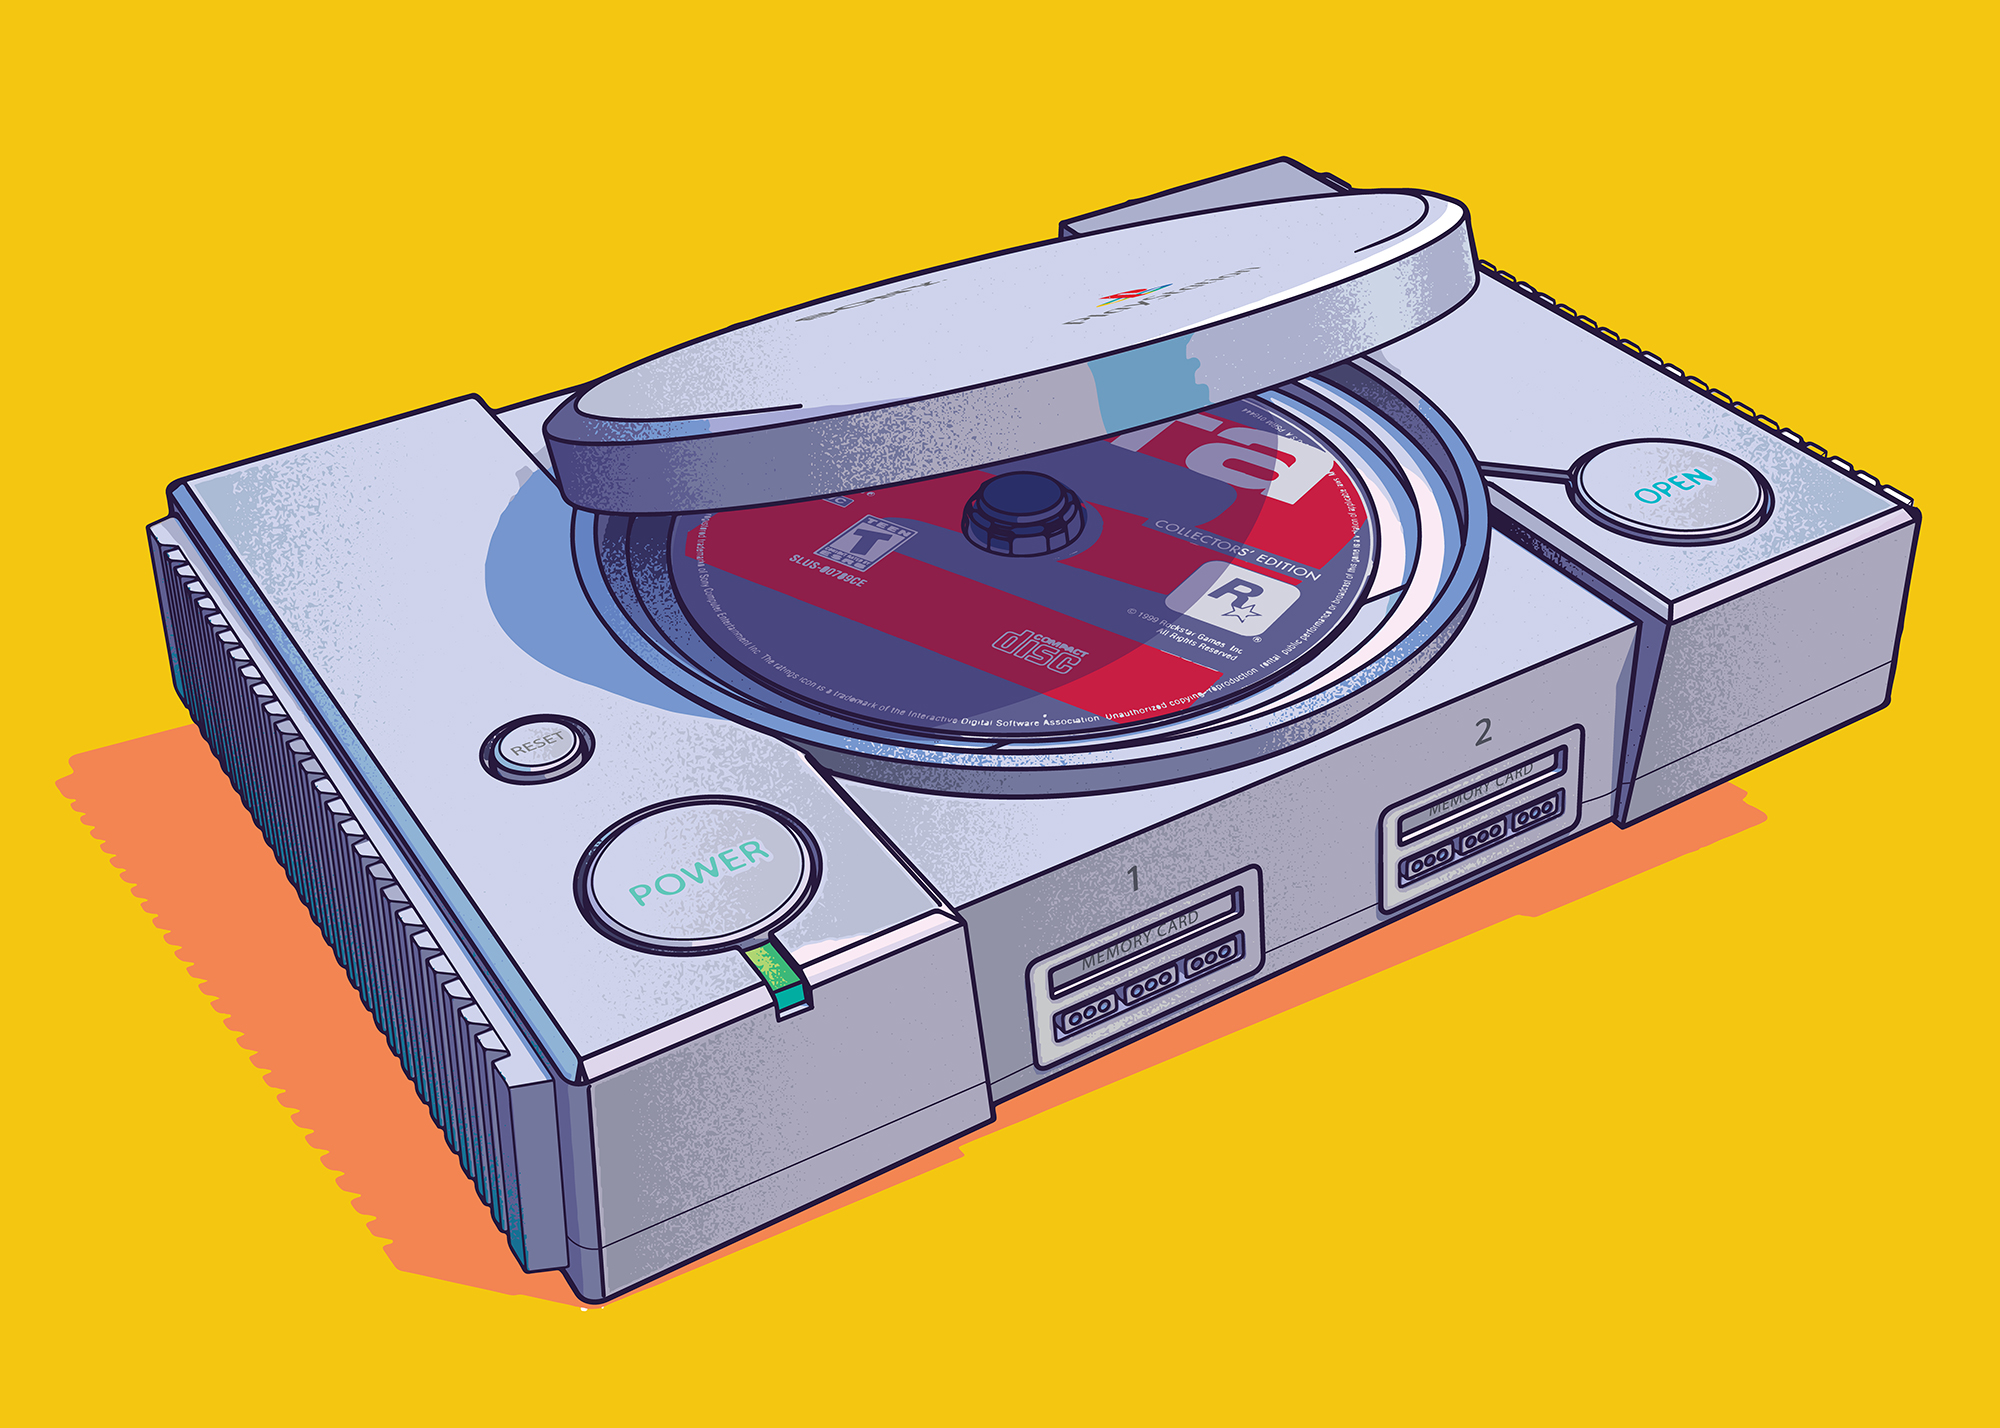 PlayStation From The 90s By Bert Musketon